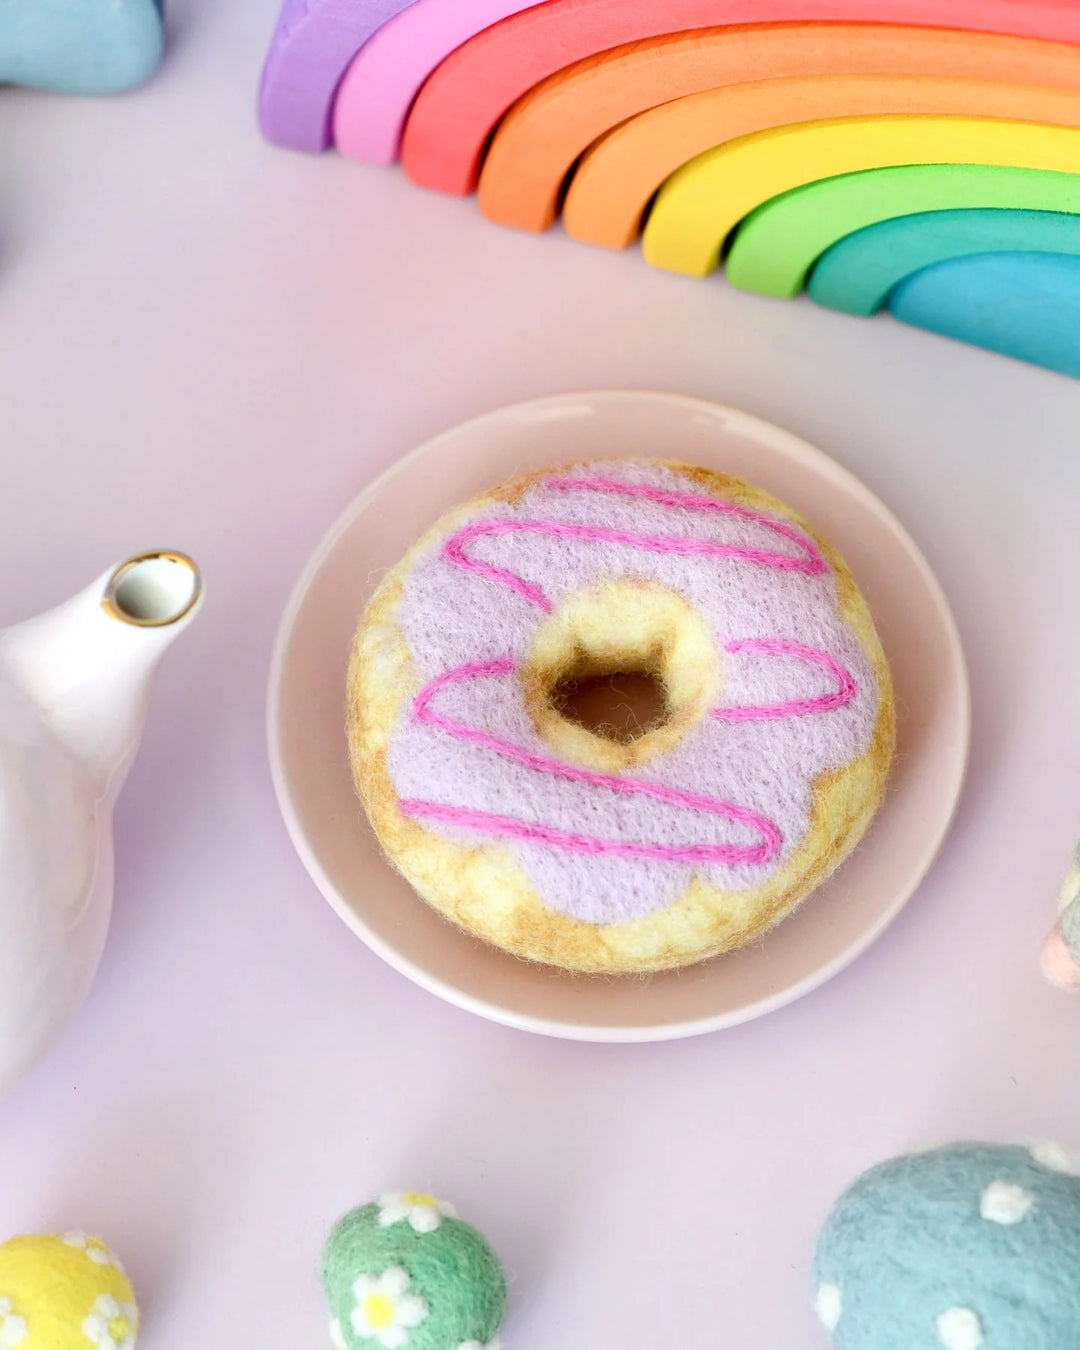 Felt Play Food | Doughnut With Pastel Frosting And Pink Drizzle